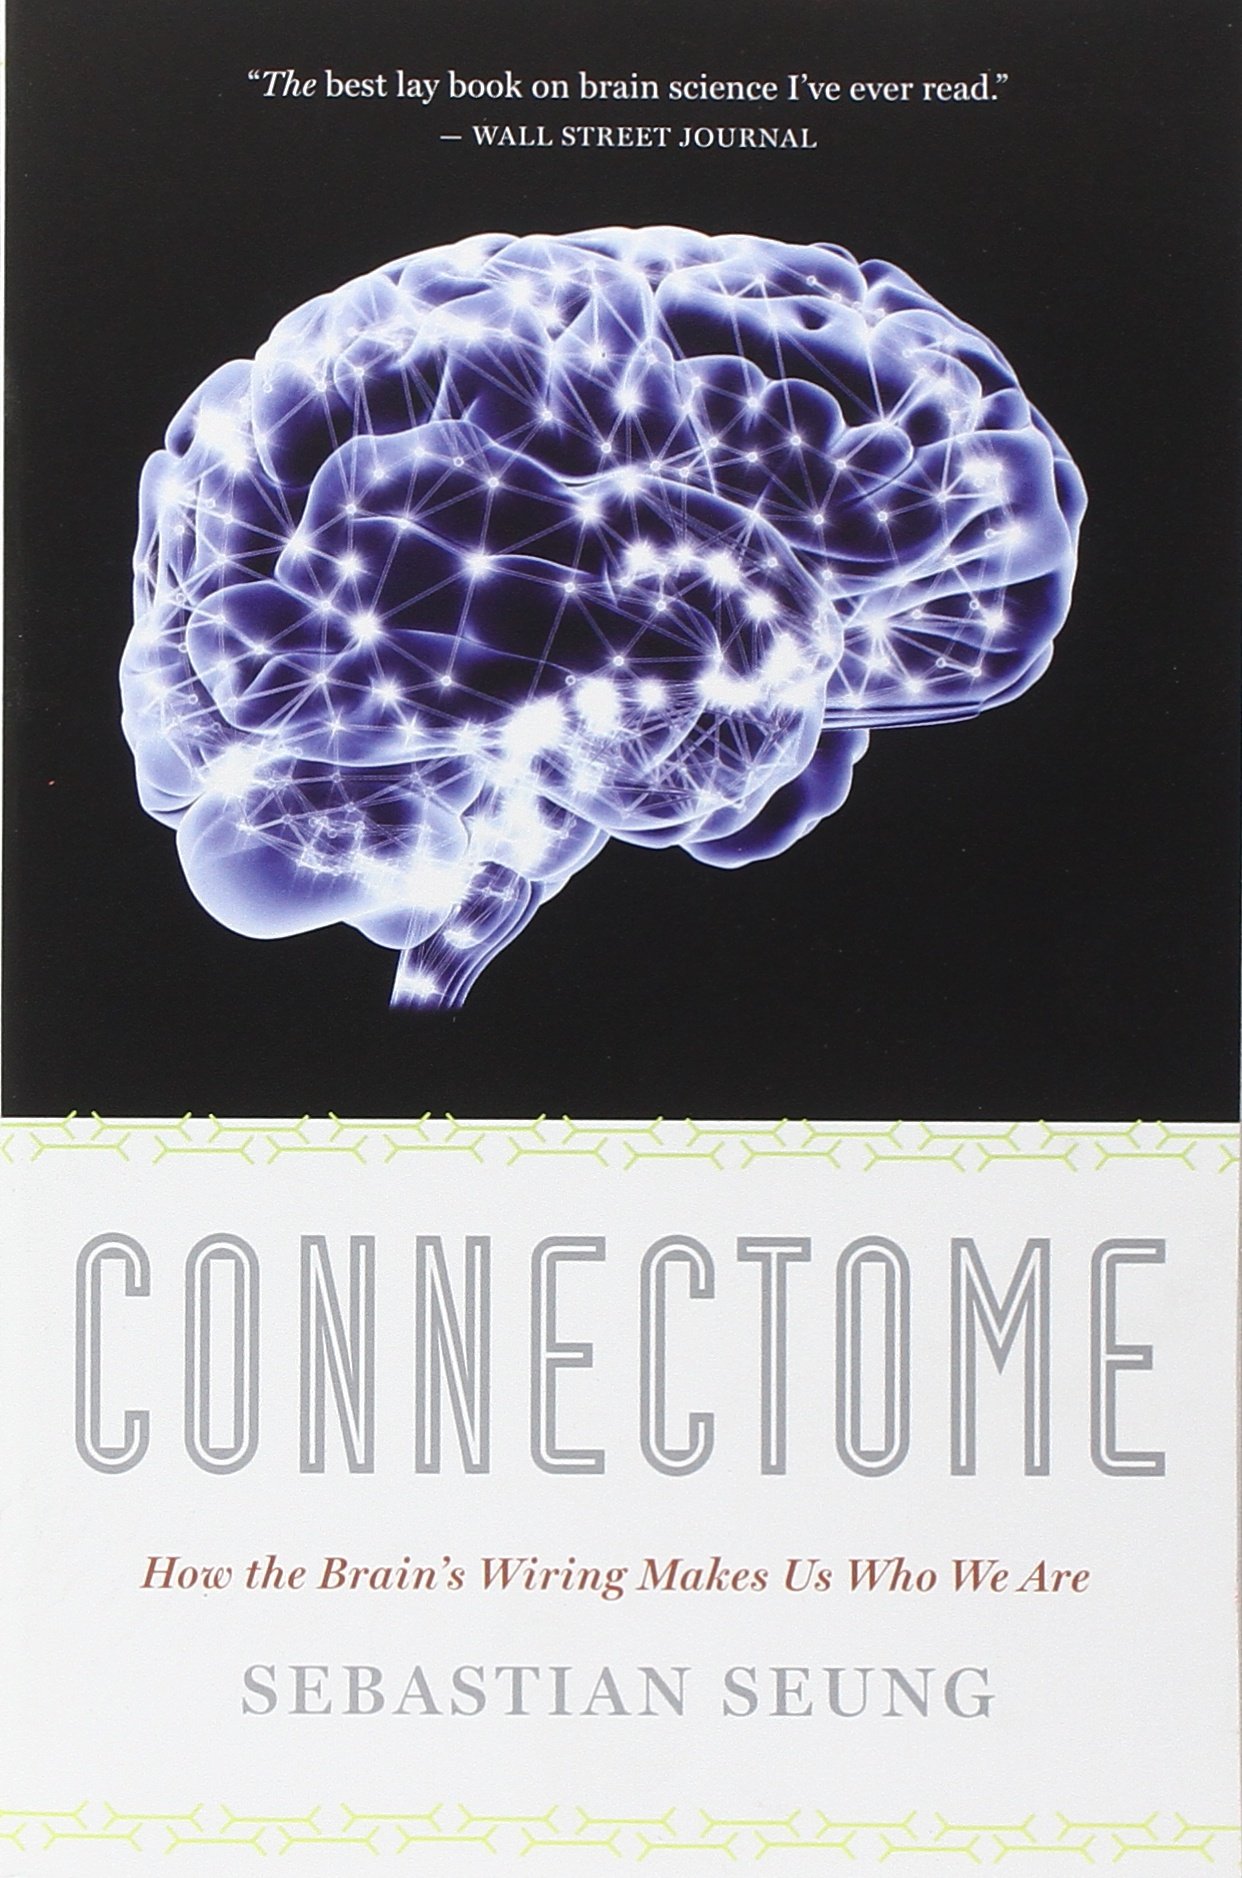 Connectome: How the Brain’s Wiring Makes Us Who We Are